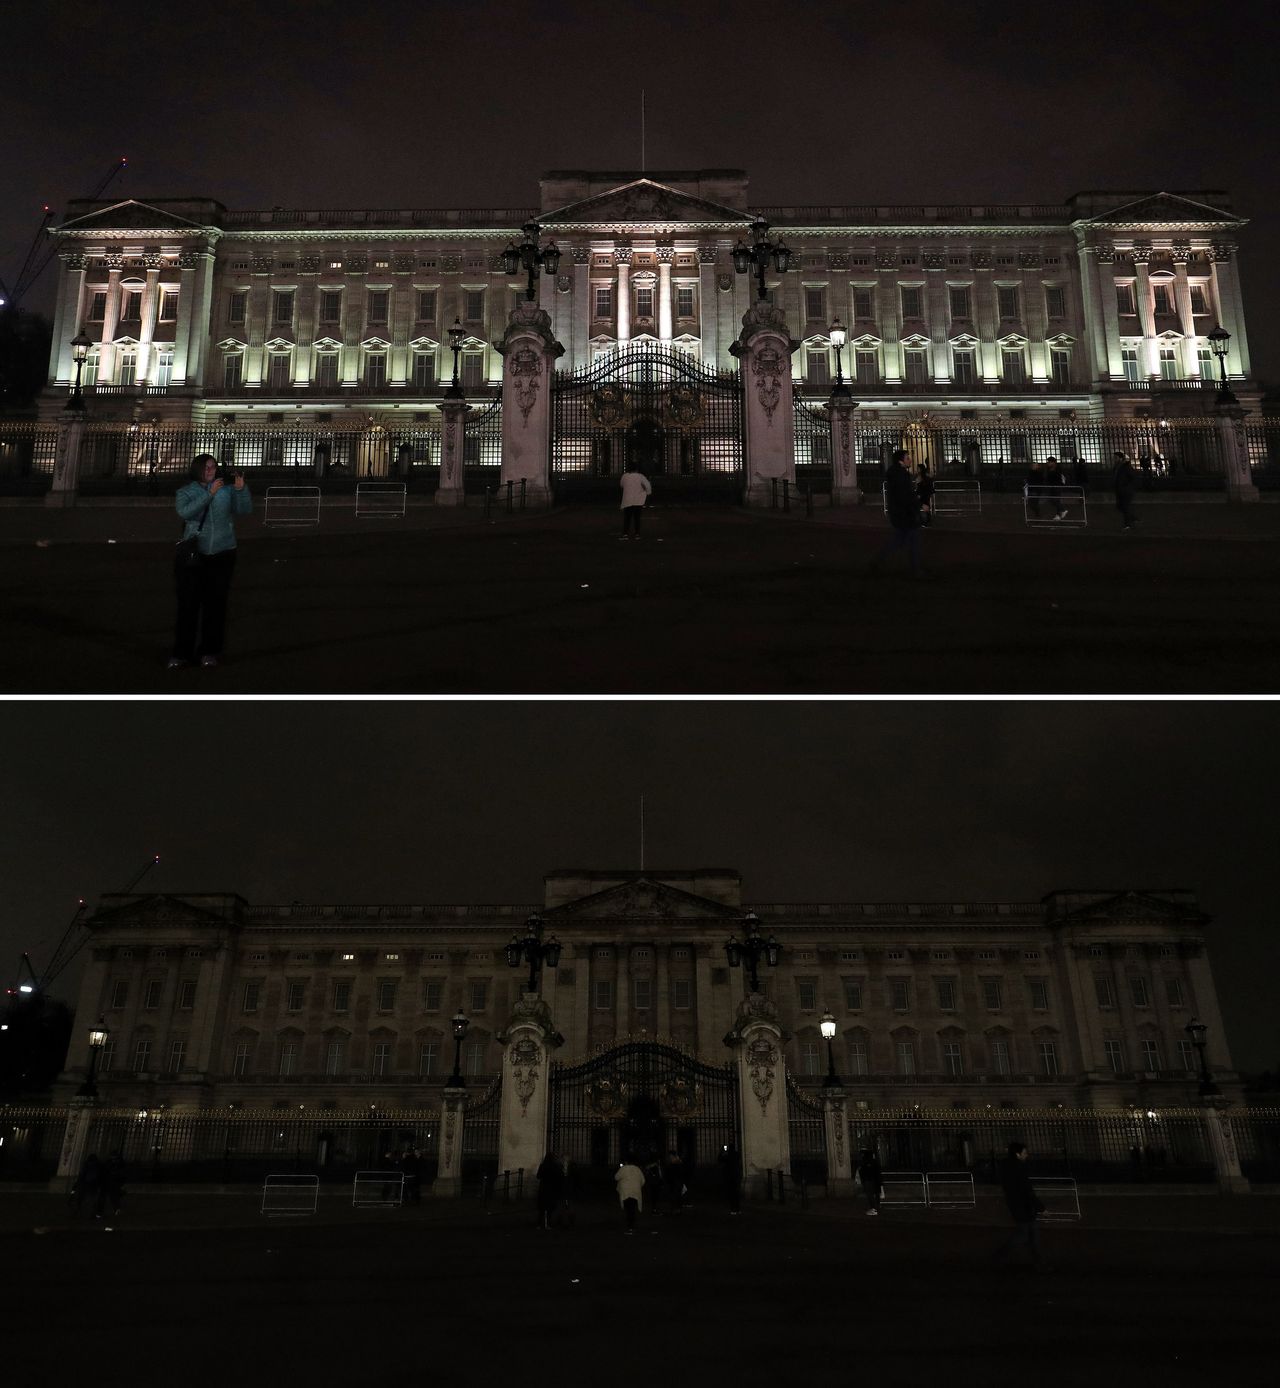 The palace, before and after switching off its lights.